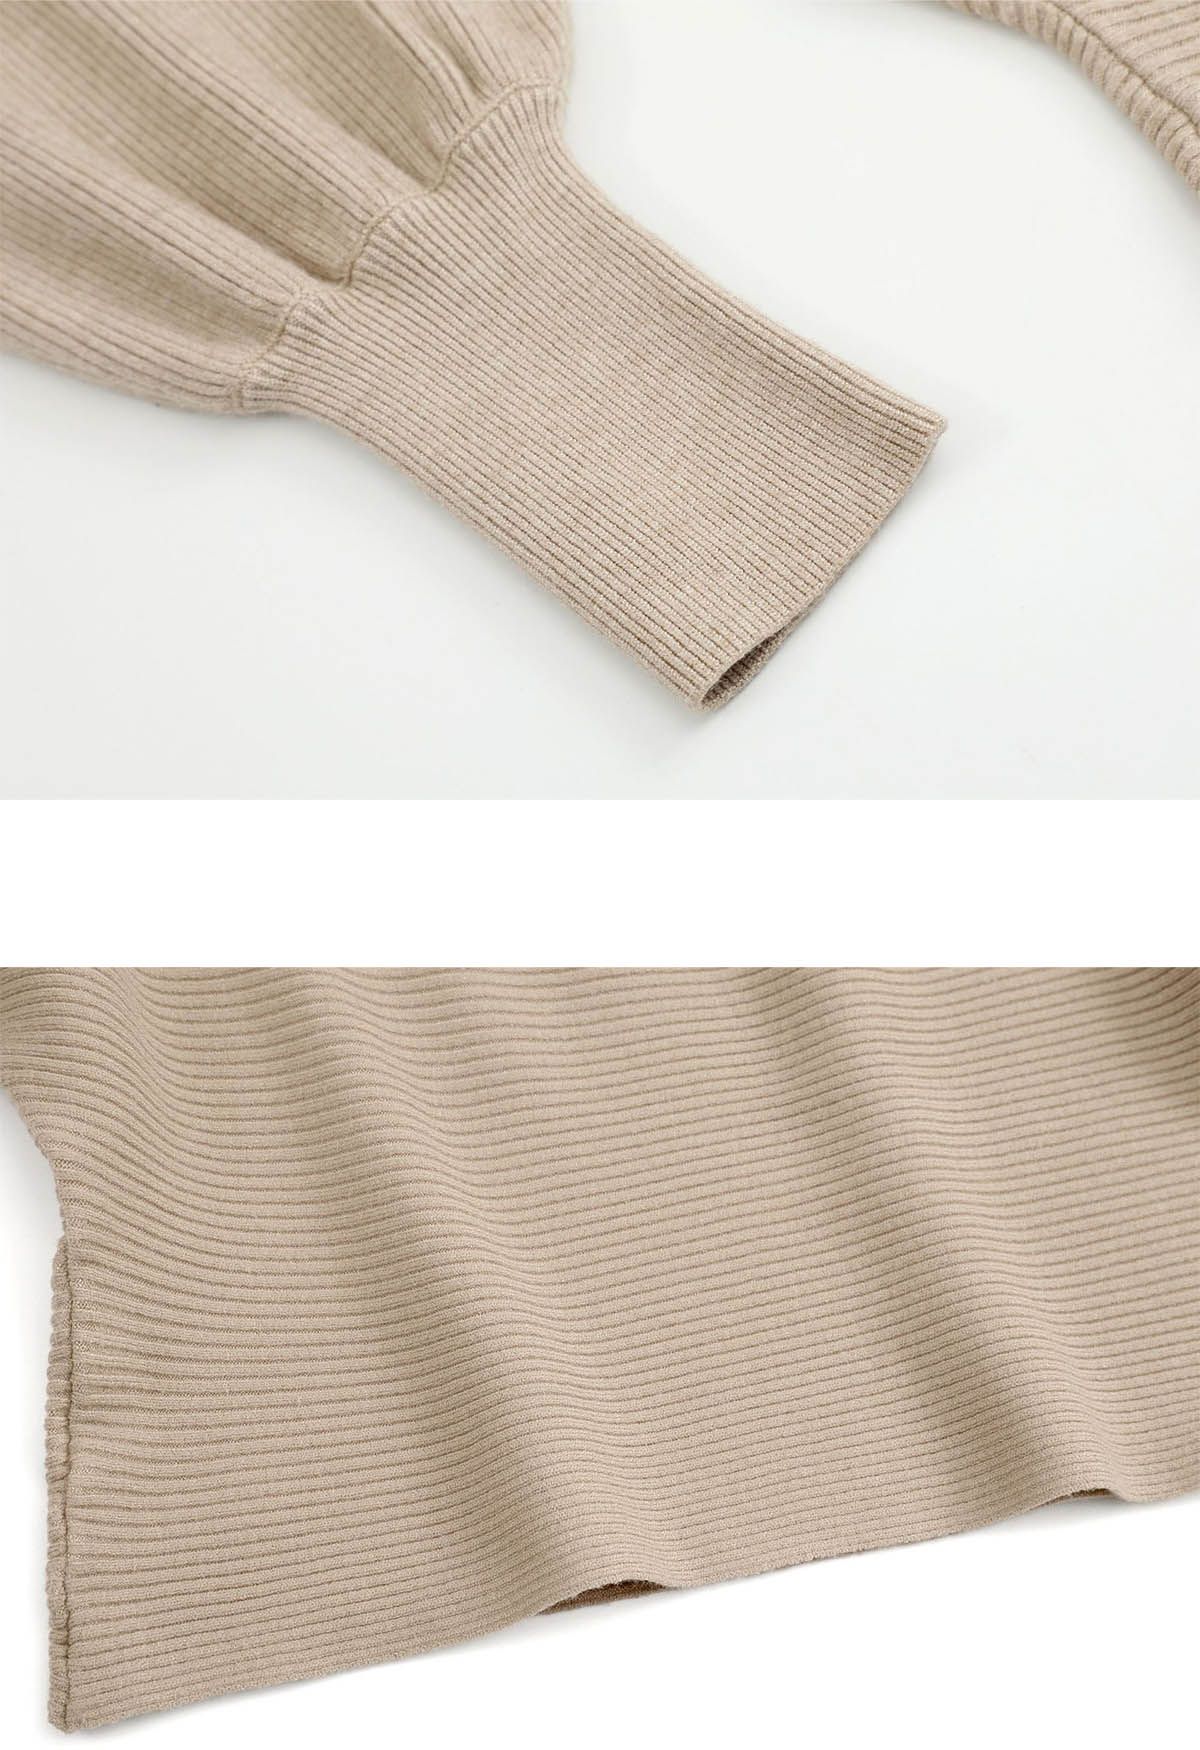 V-Neck Batwing Sleeves Pullover Knit Sweater in Camel